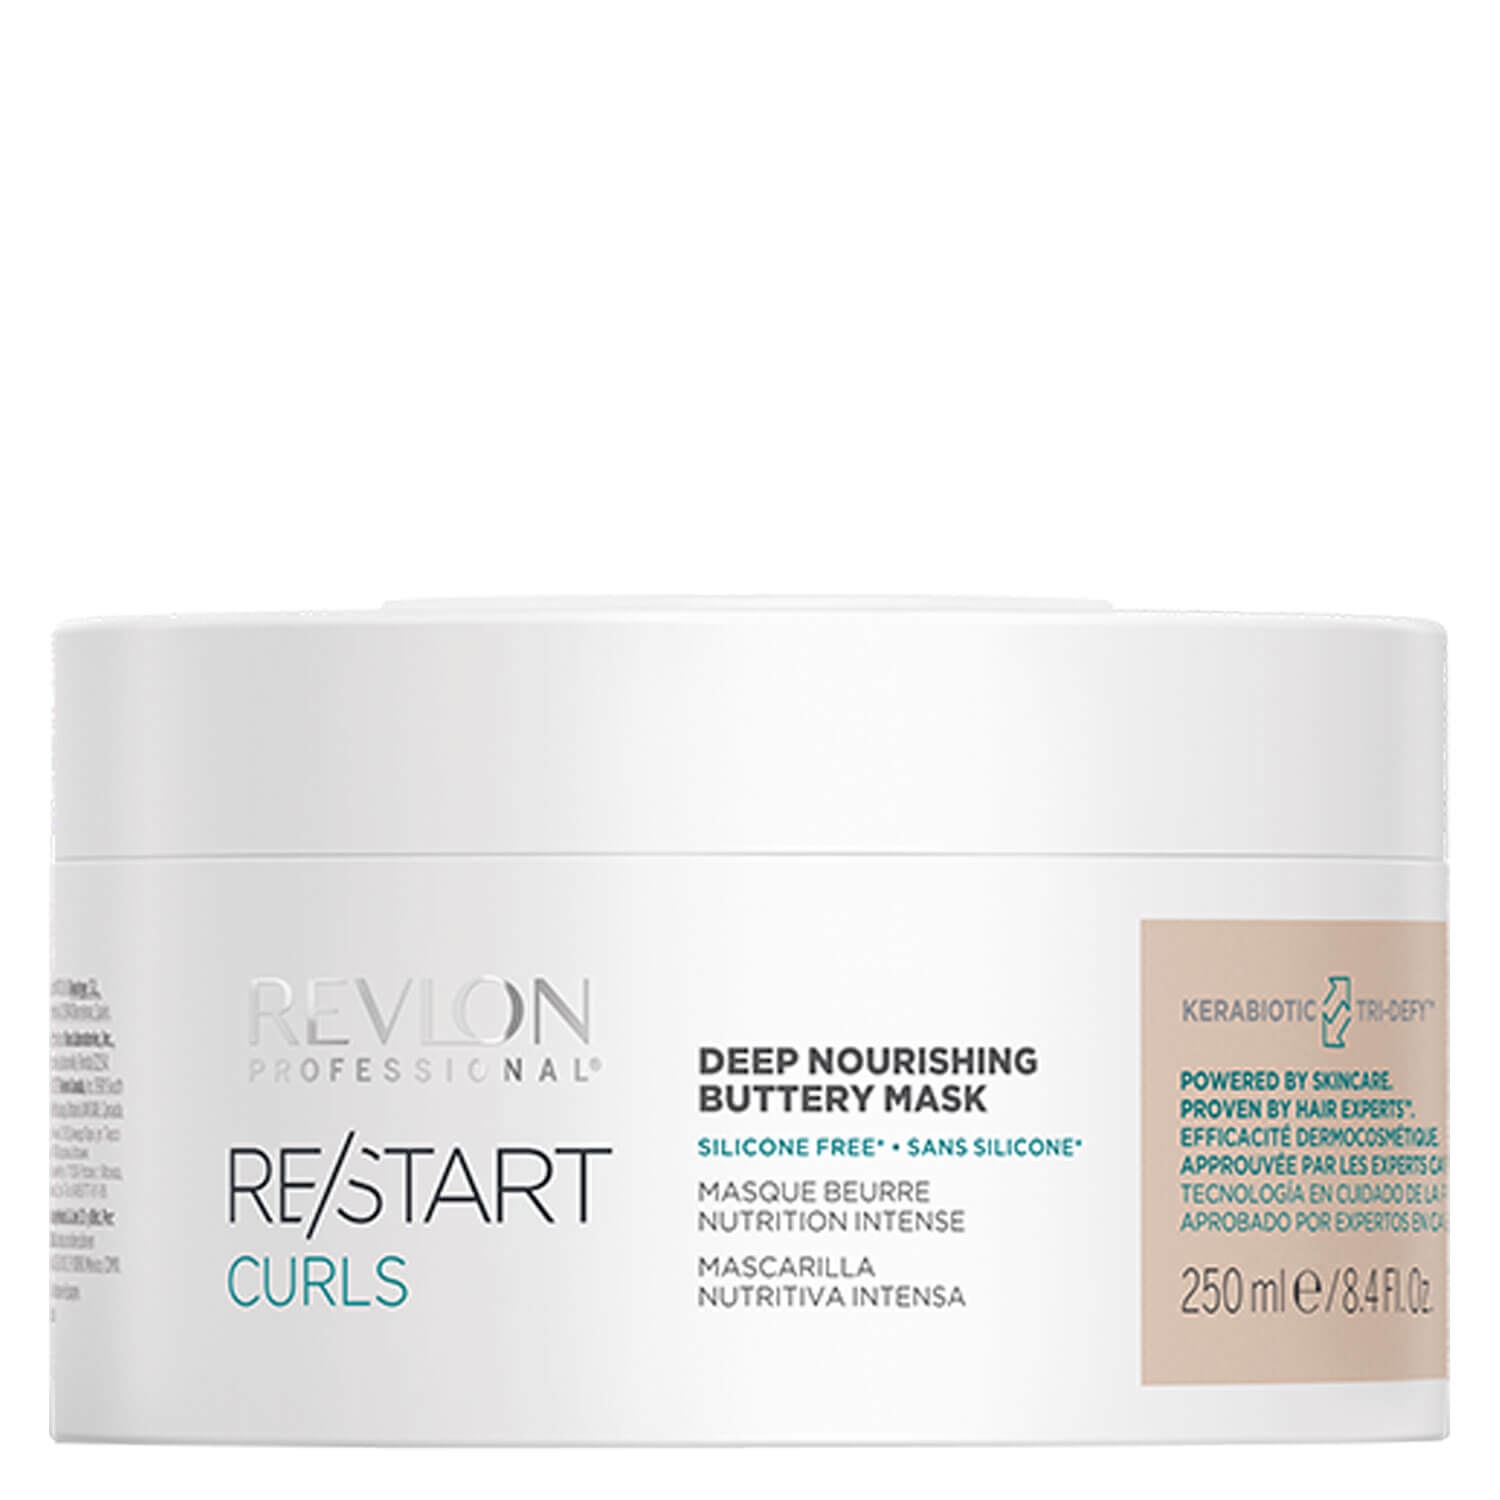 Product image from RE/START CURLS - Deep Nourishing Buttery Mask